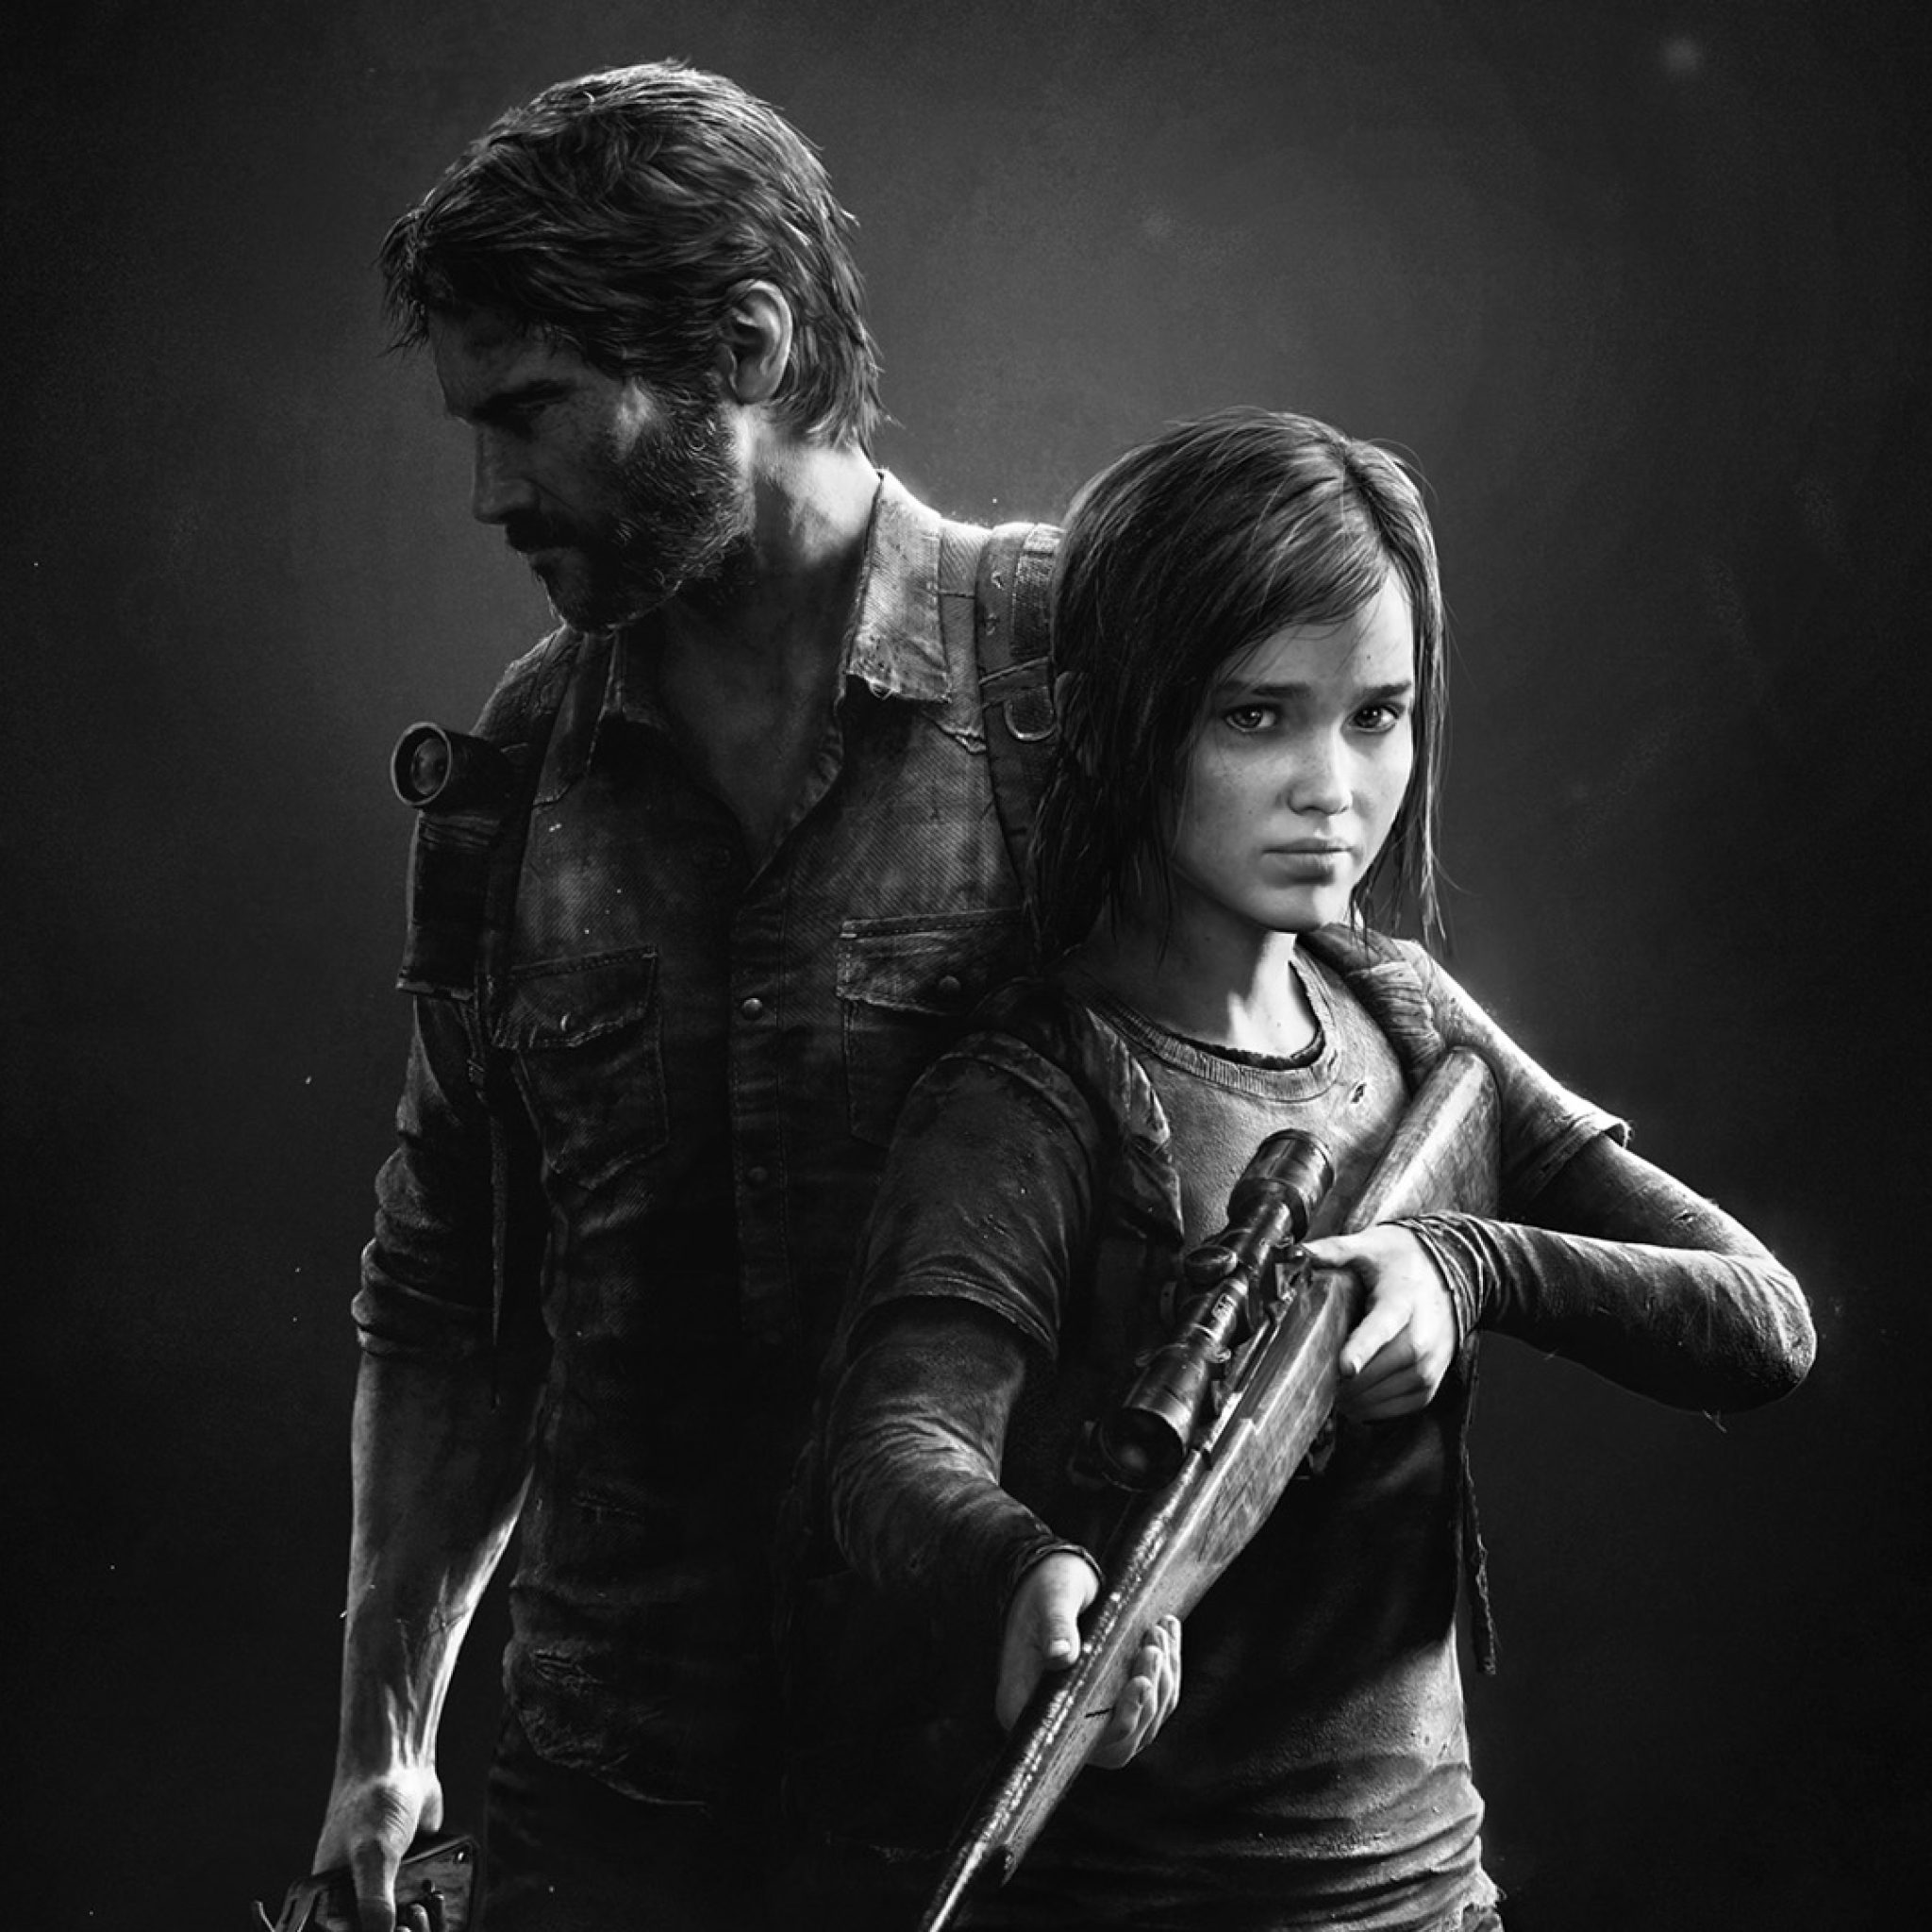 Ласт оф 18. The last of us. The last of us игра. Ласт оф АС 1.